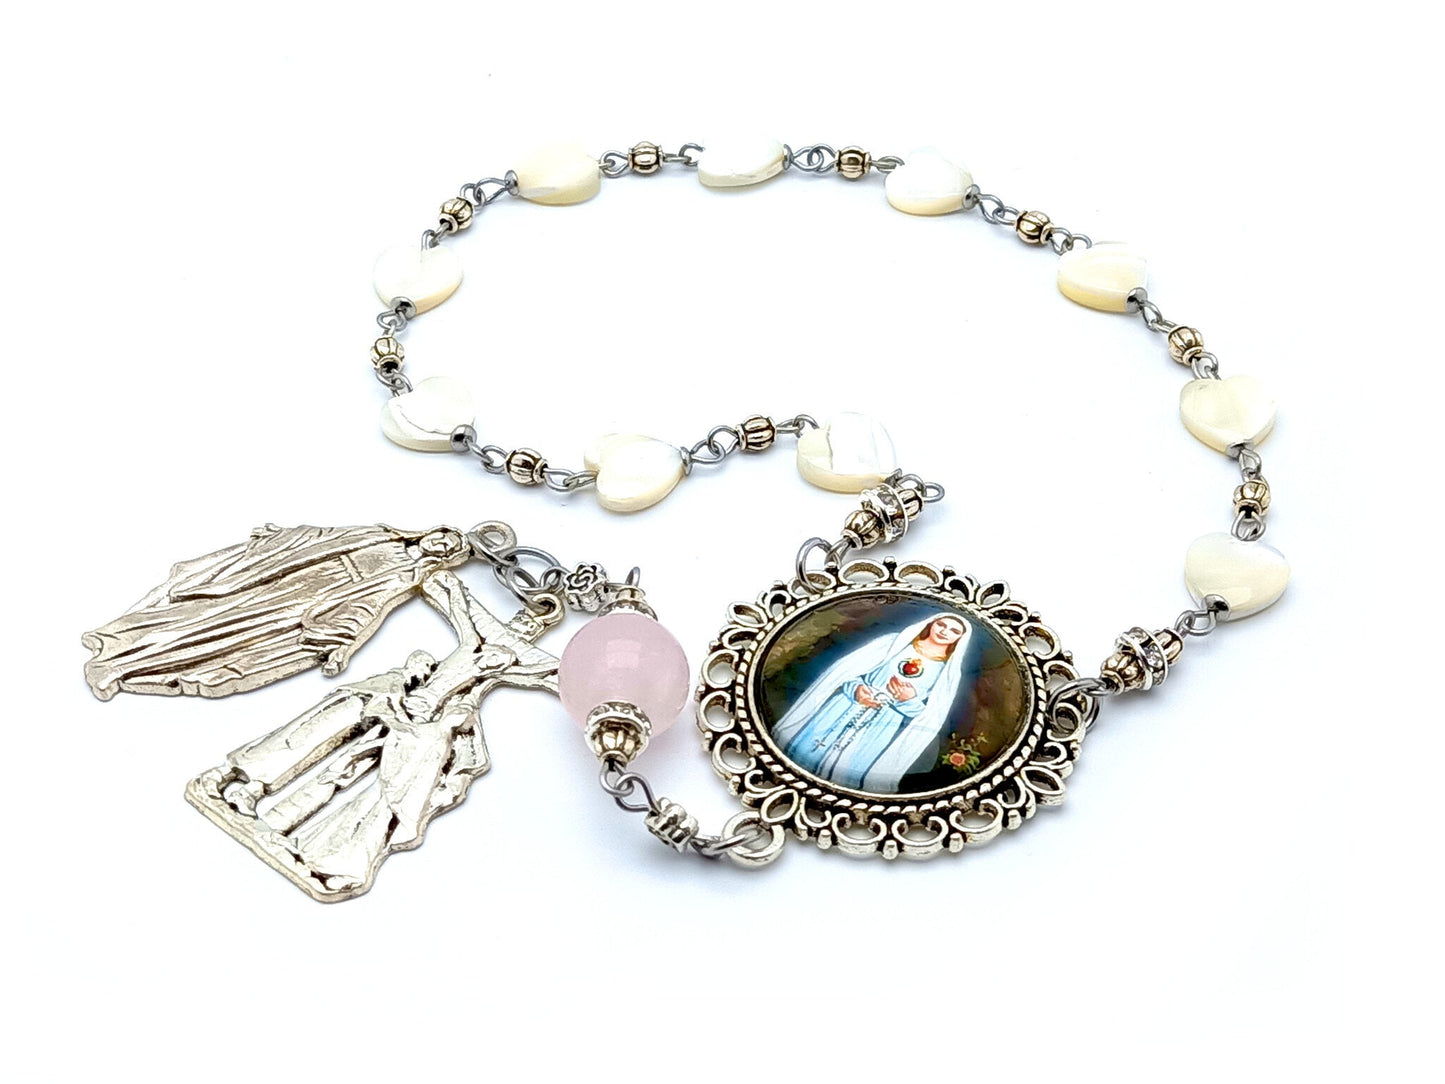 Immaculate Heart of Mary unique rosary beads single decade rosary beads with mother of pearl and pink glass beads, La Pieta crucifix and picture centre medal.